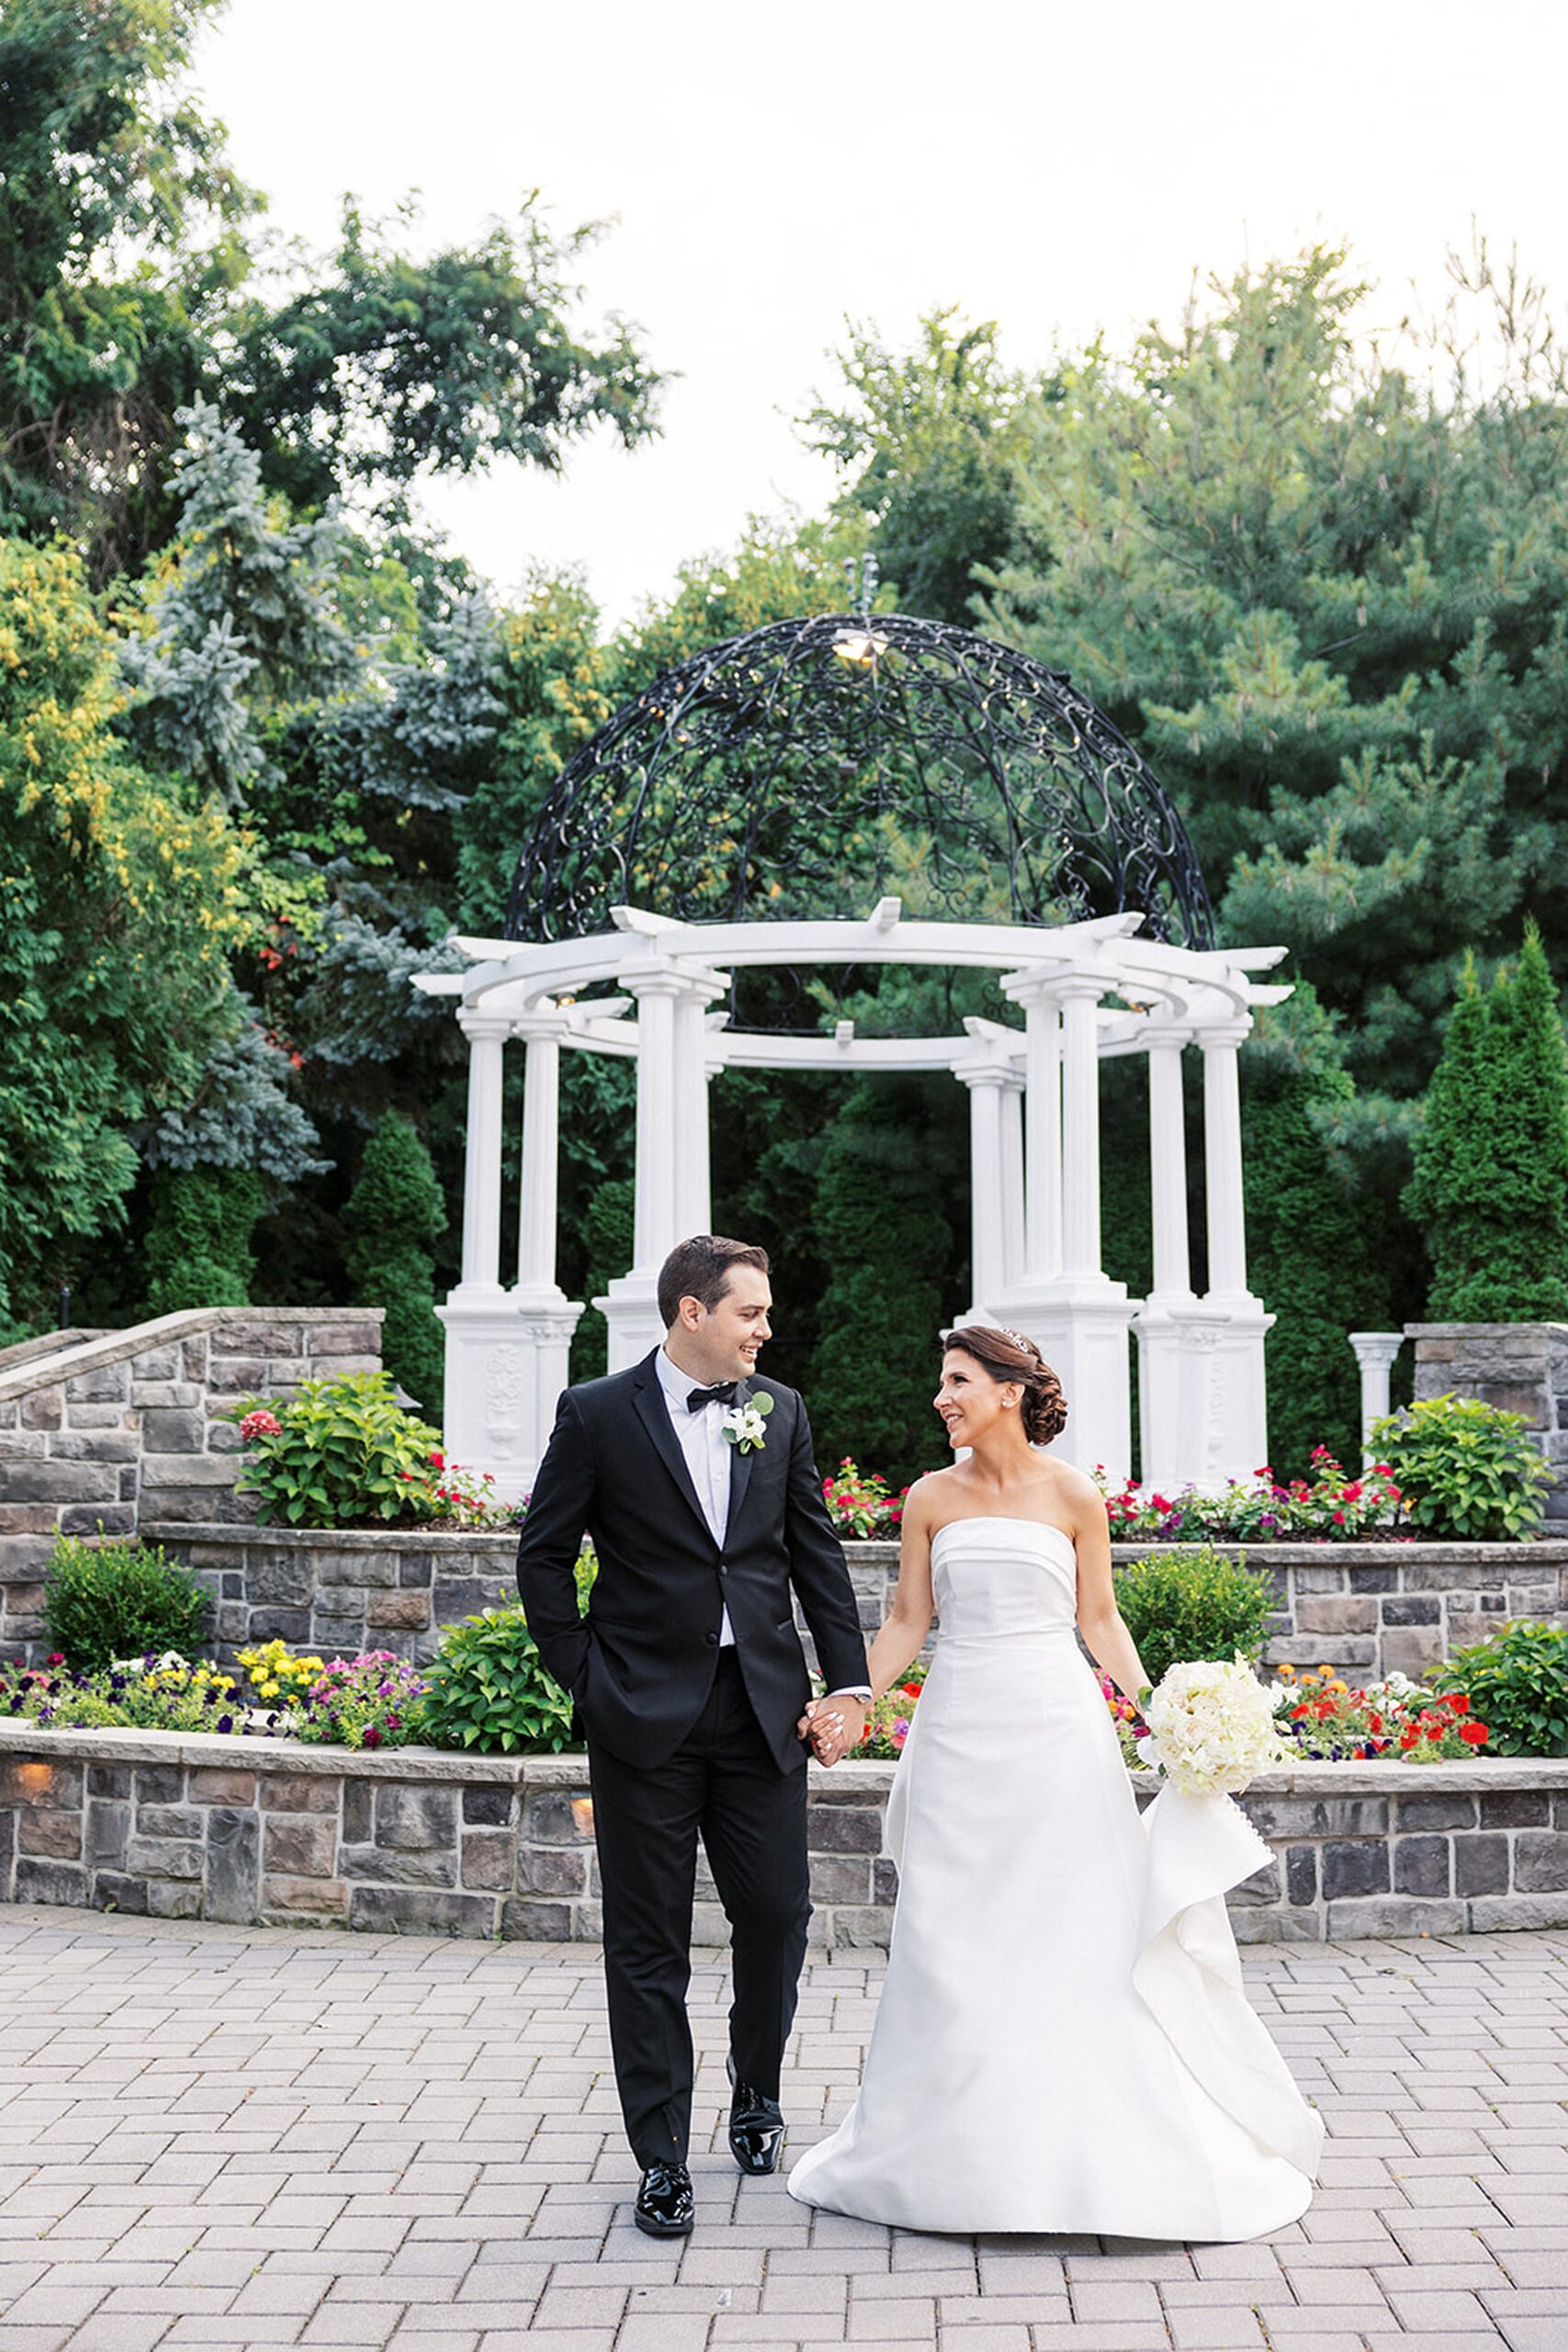 Newlyweds hold hands while walking through a garden with a large white gazebo